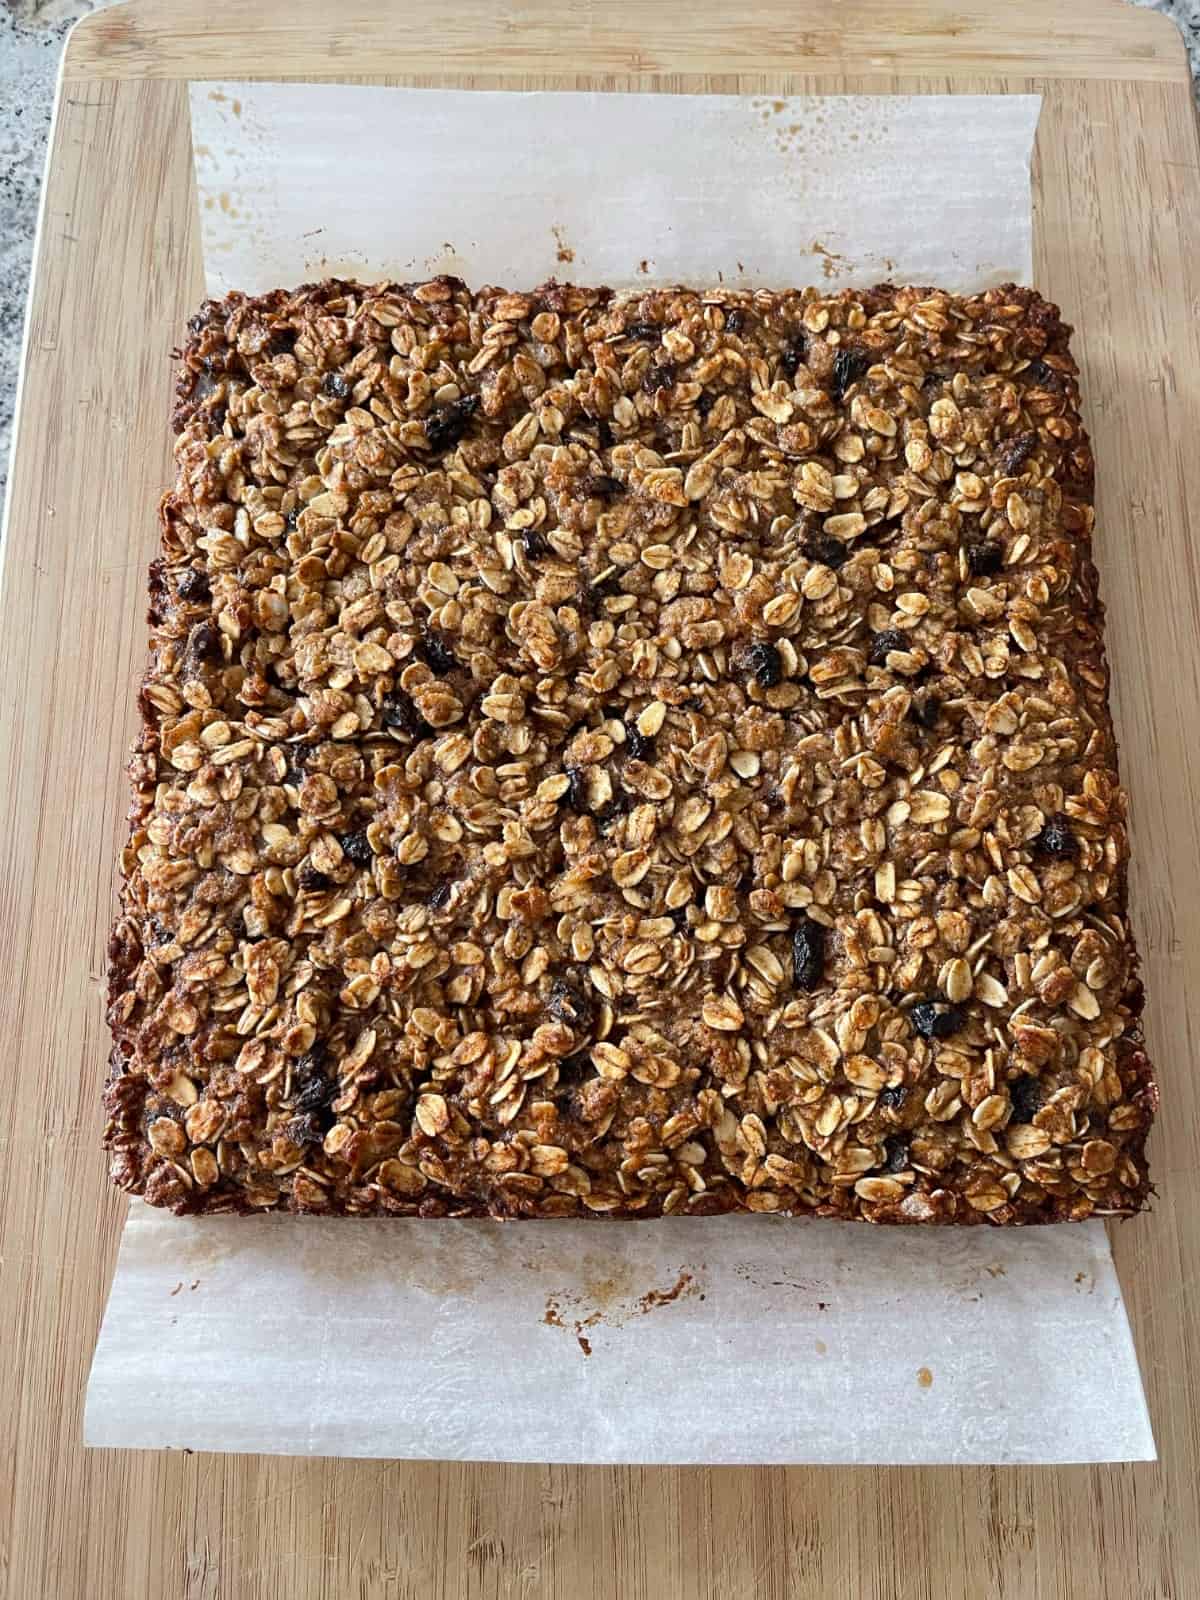 Fresh baked uncut oatmeal spice bars on parchment paper on wood cutting board.